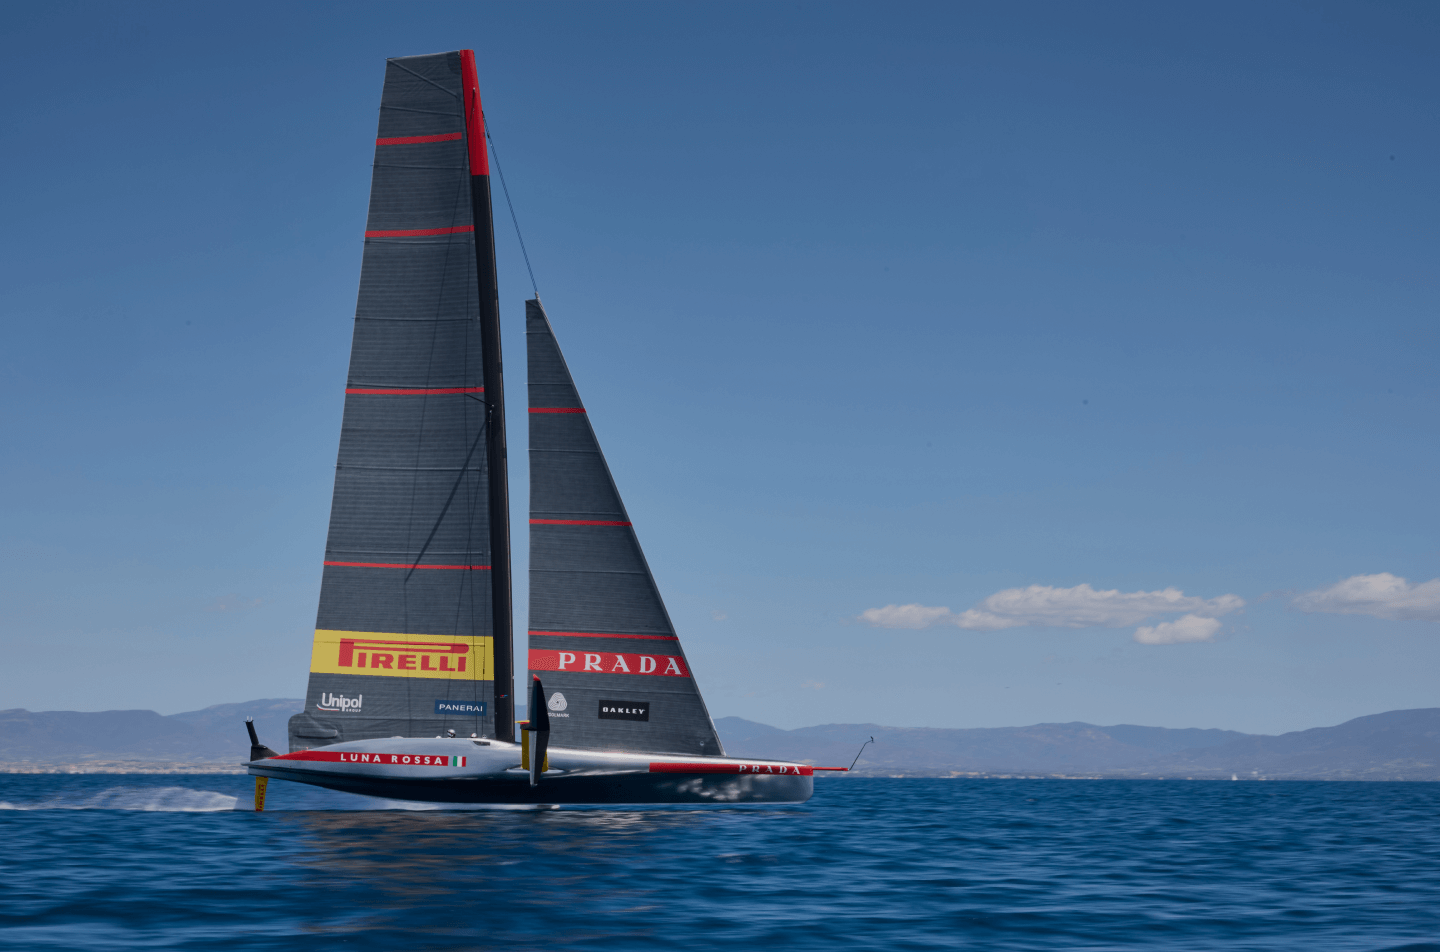 The caravel Luna Rossa sailing on the high seas with the Pirelli logo displayed and cloudy skies in the background.